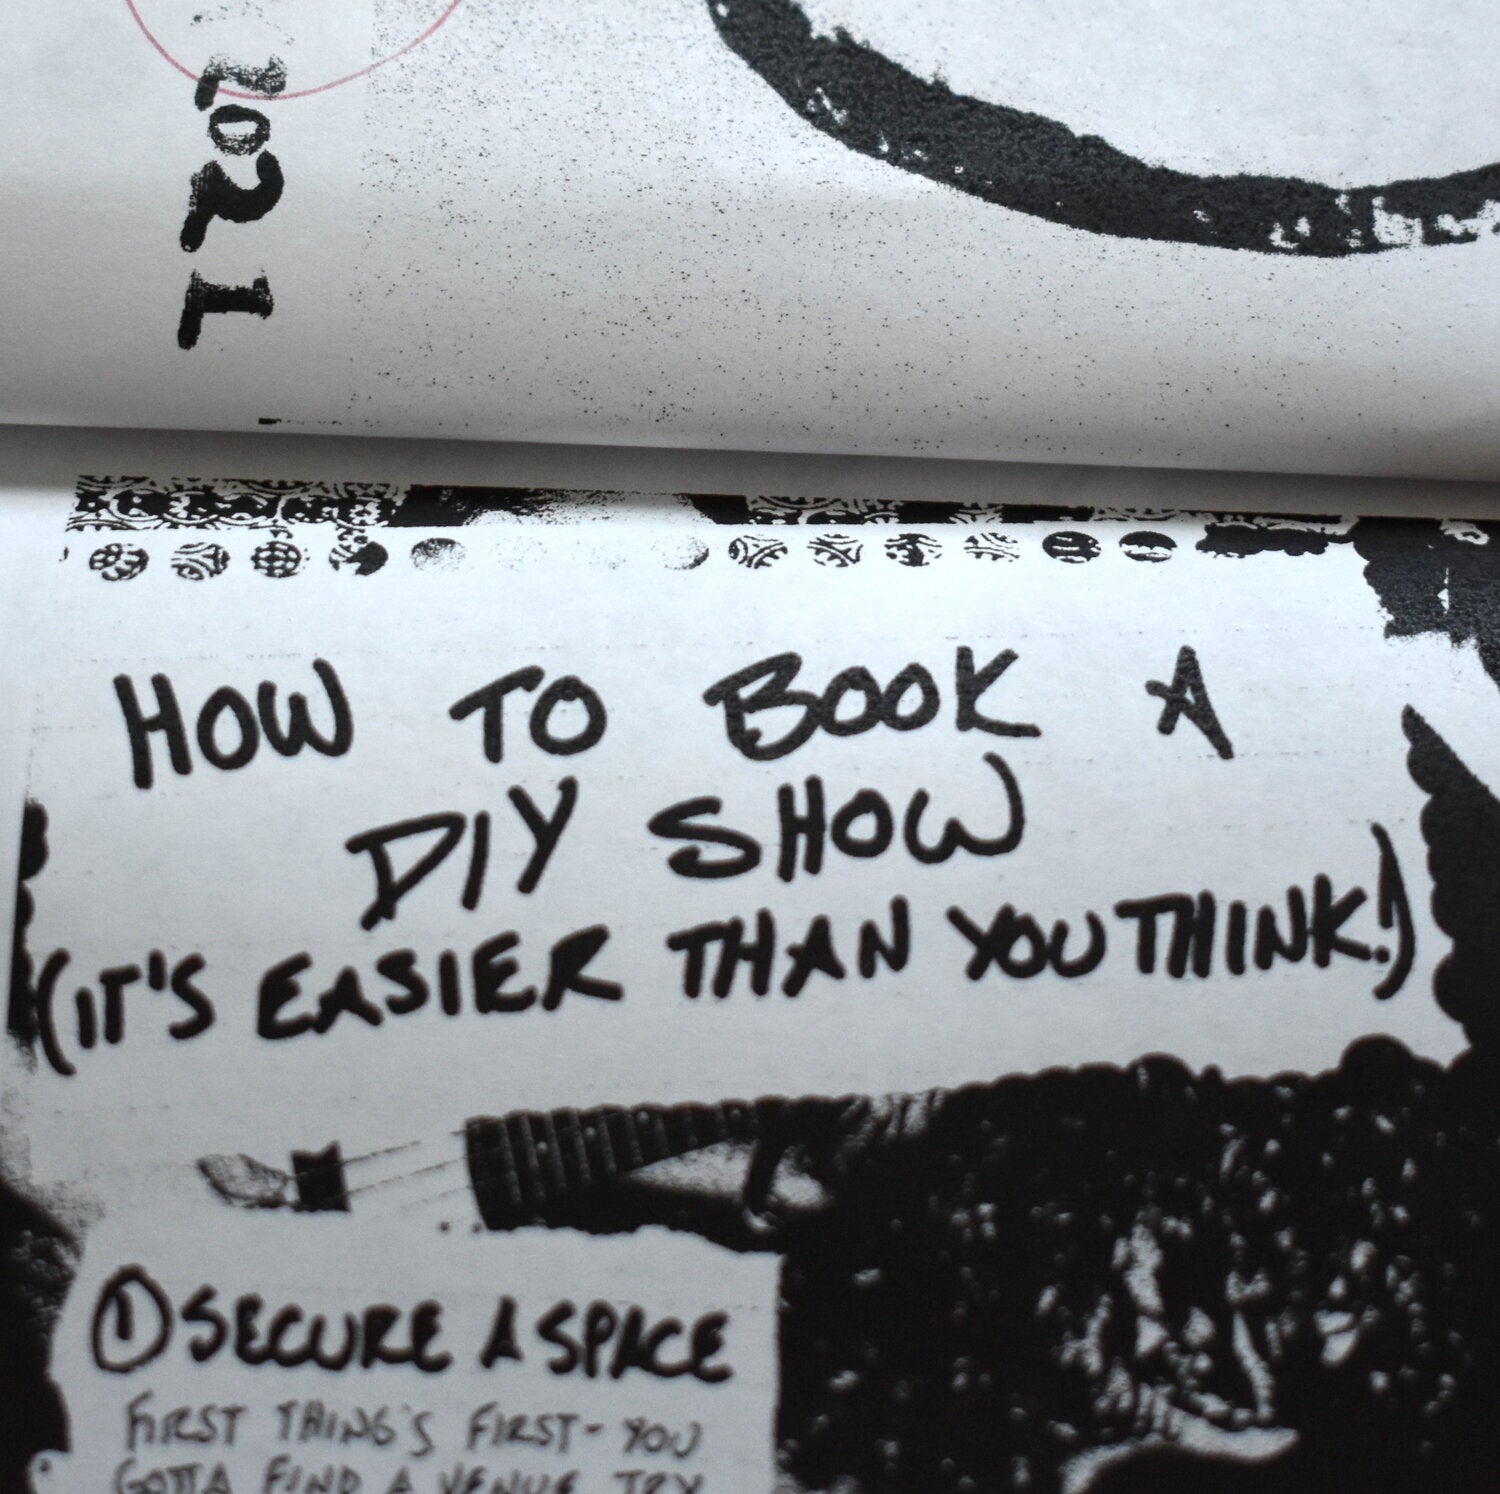 Hit the Decks: A This & That Tapes FanZiNE of Music, Art, & Cassette Culture